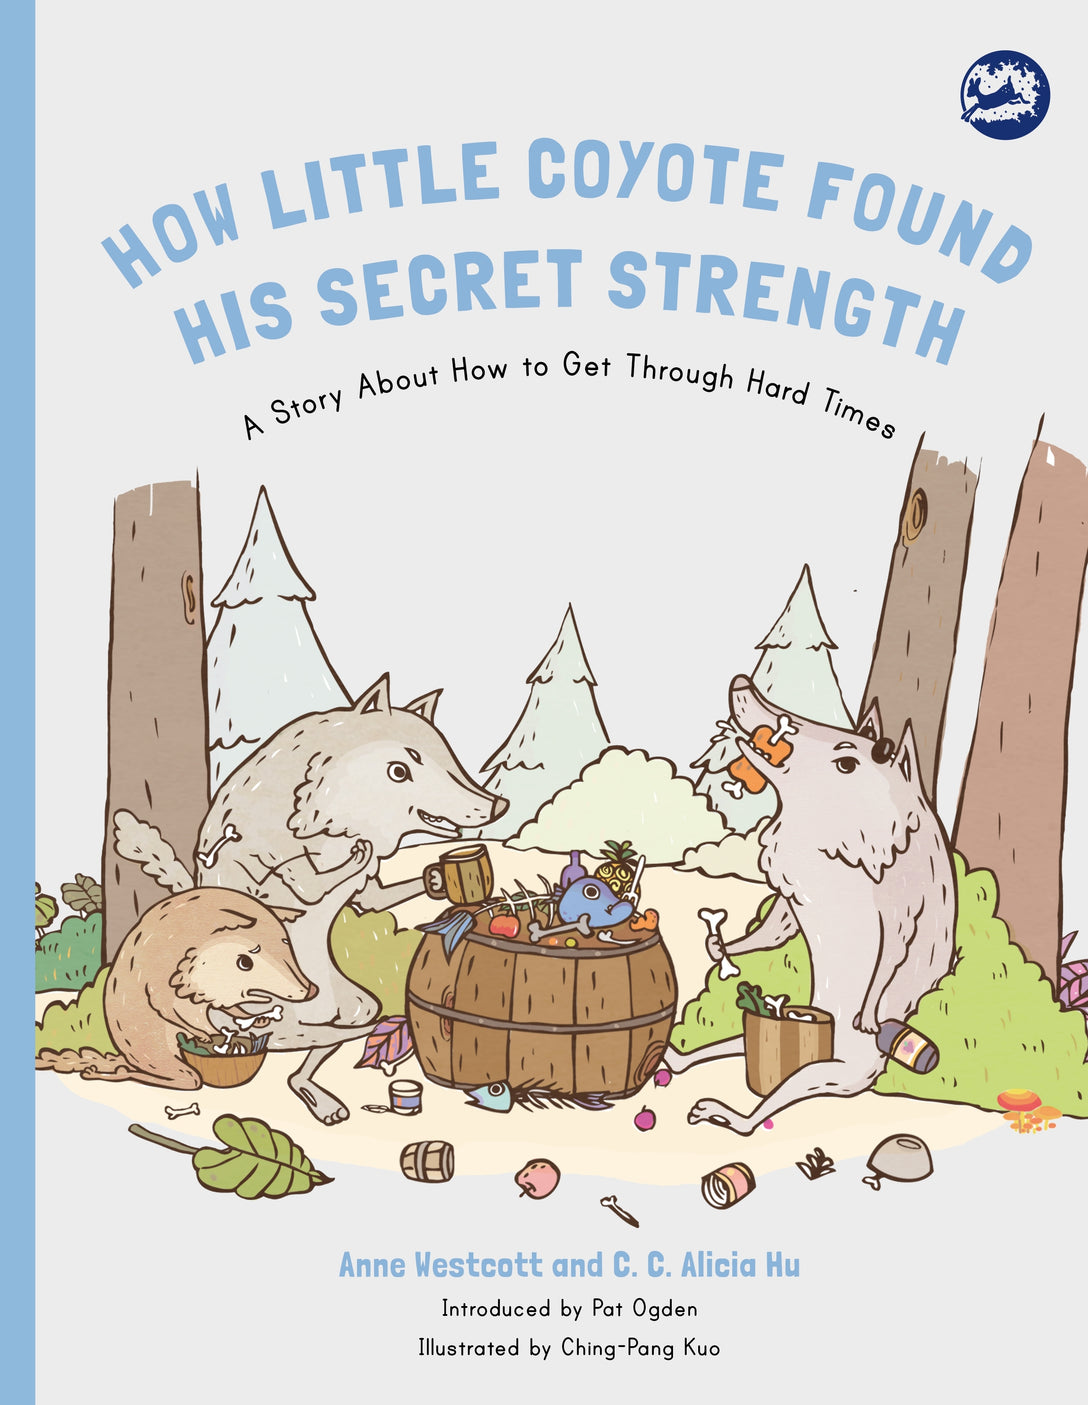 How Little Coyote Found His Secret Strength by Anne Westcott, C. C. Alicia Hu, Ching-Pang Kuo